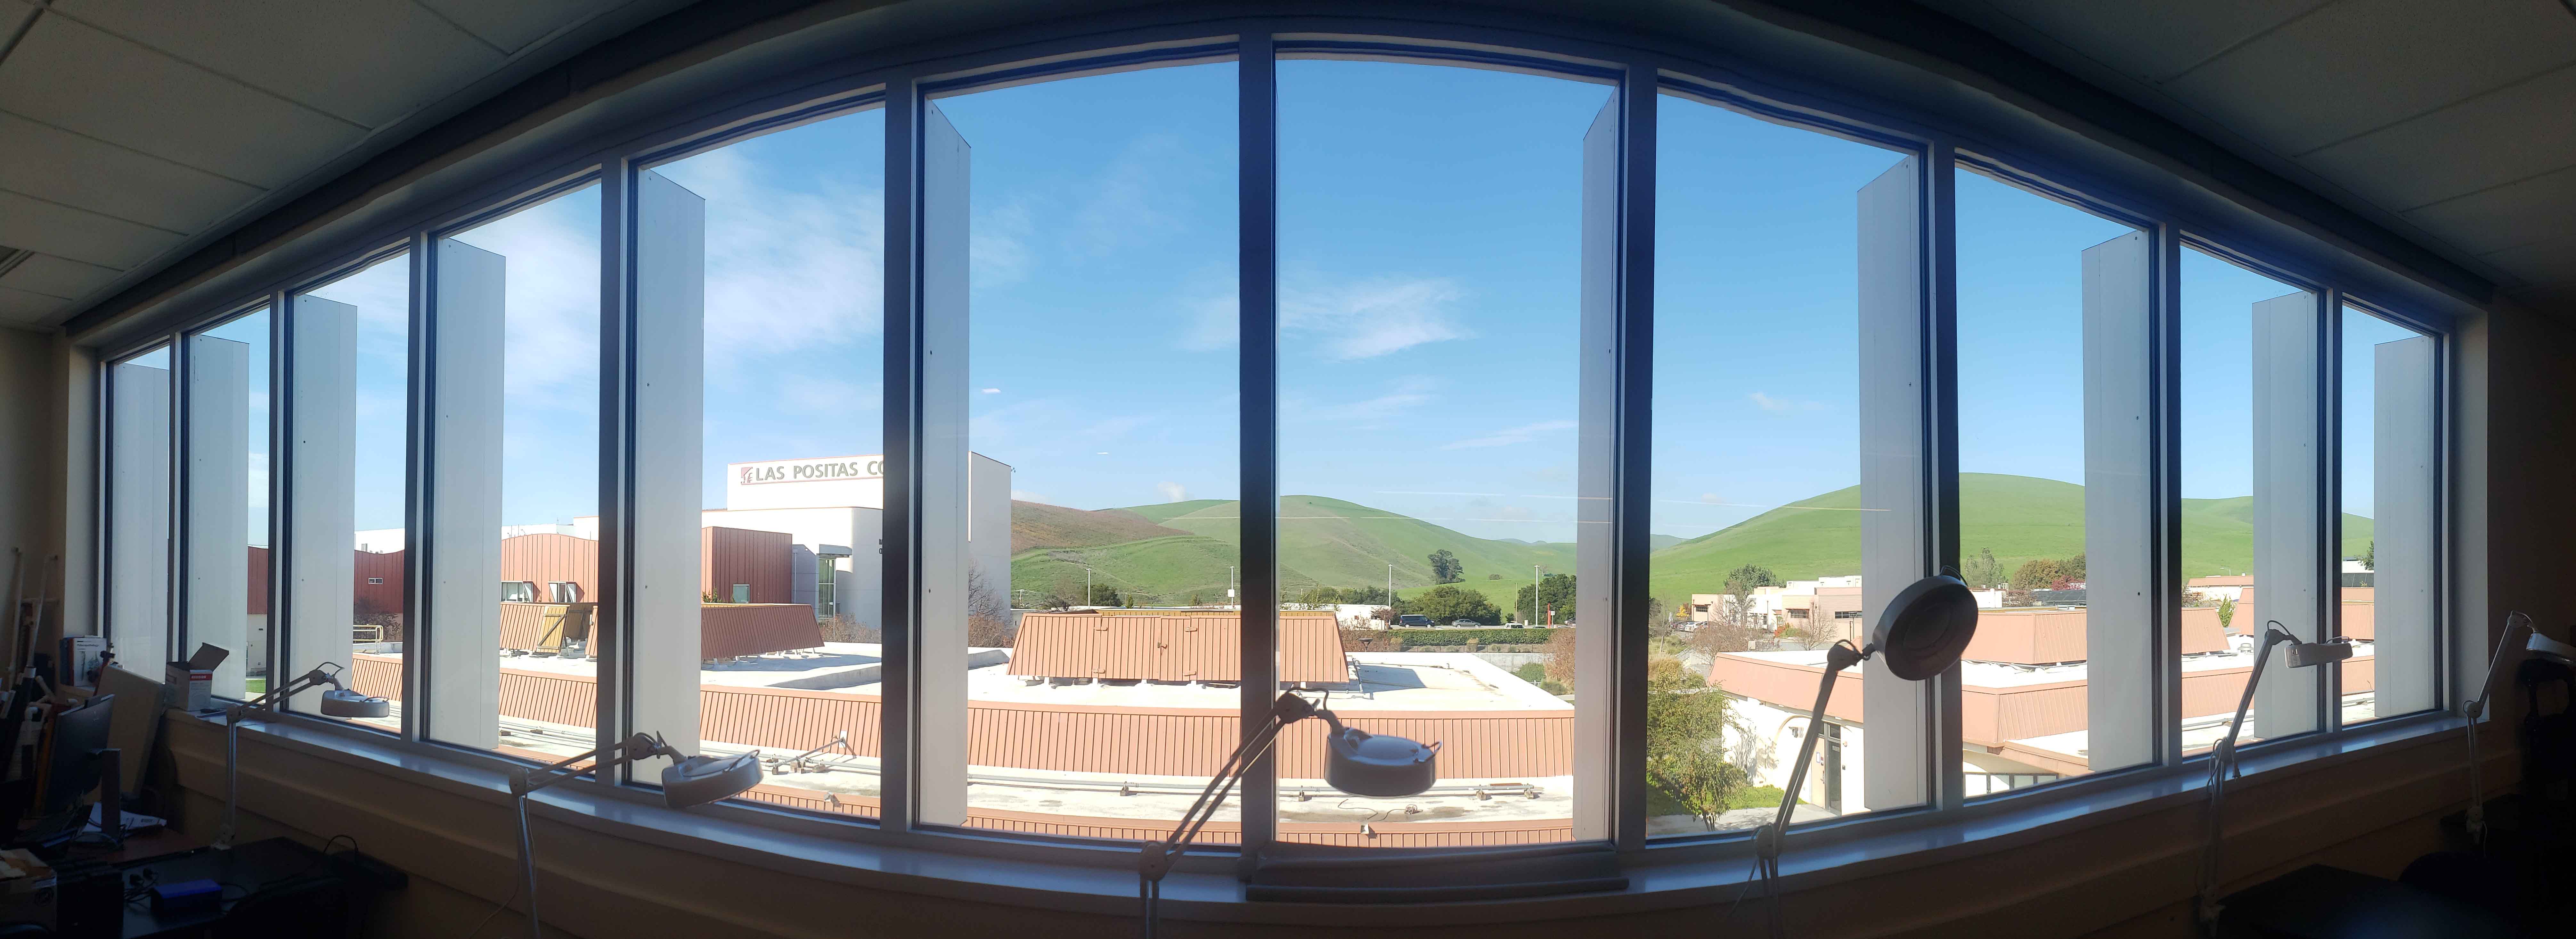 Westward view of campus from the second floor of Building 1000